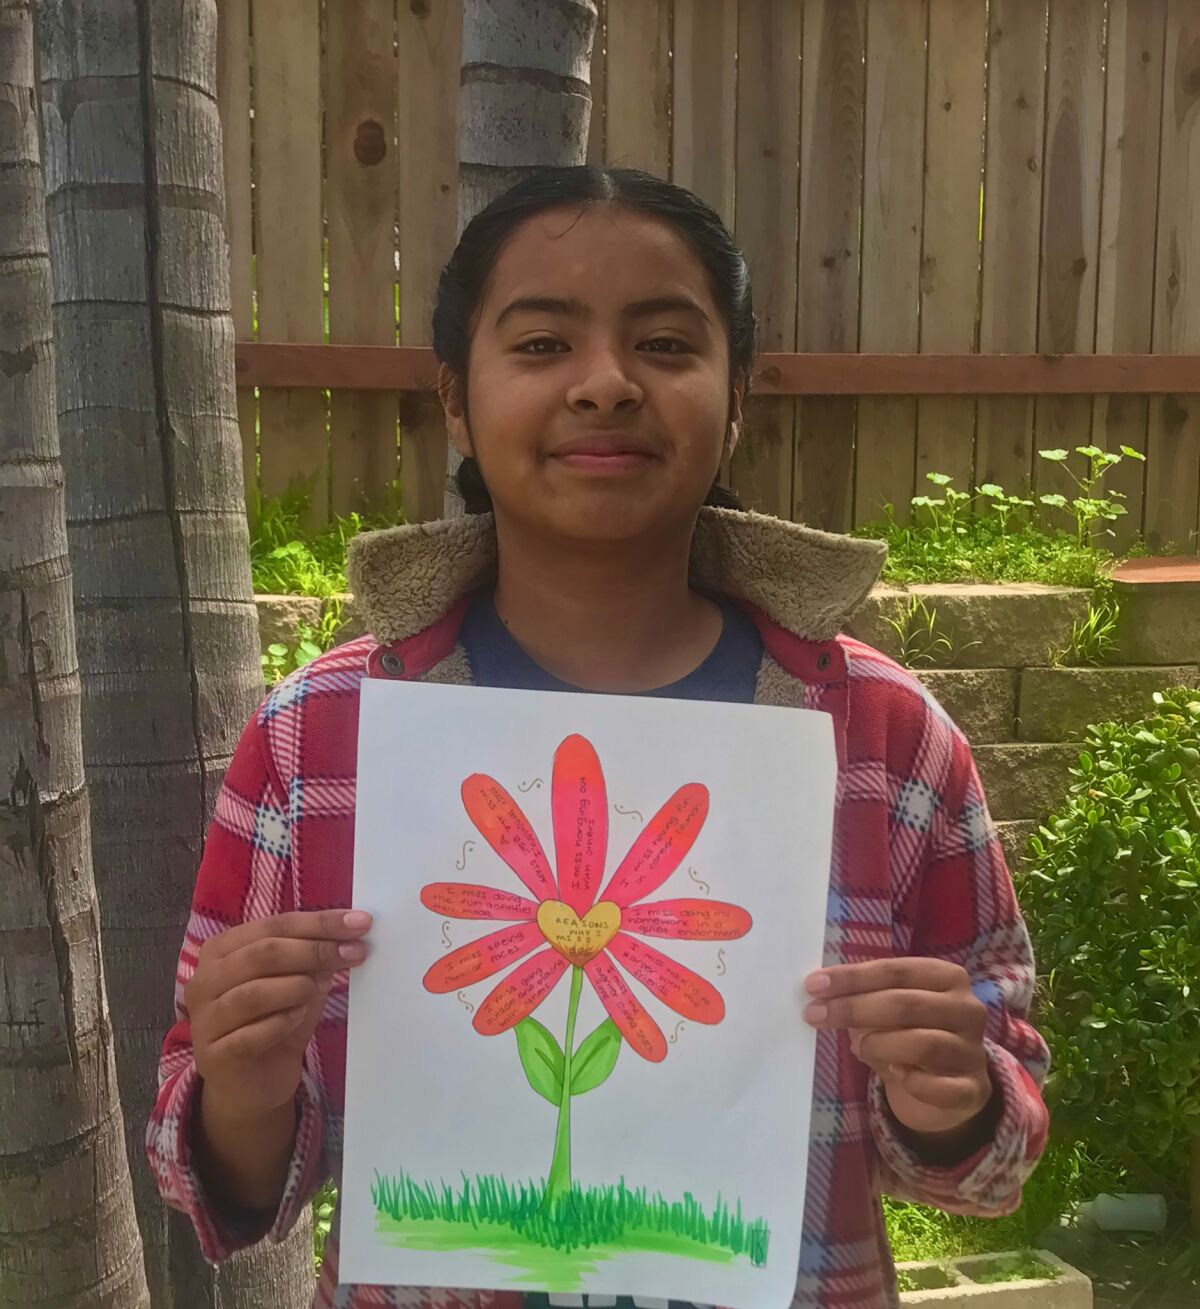 A Boys & Girls Club member with her drawing.